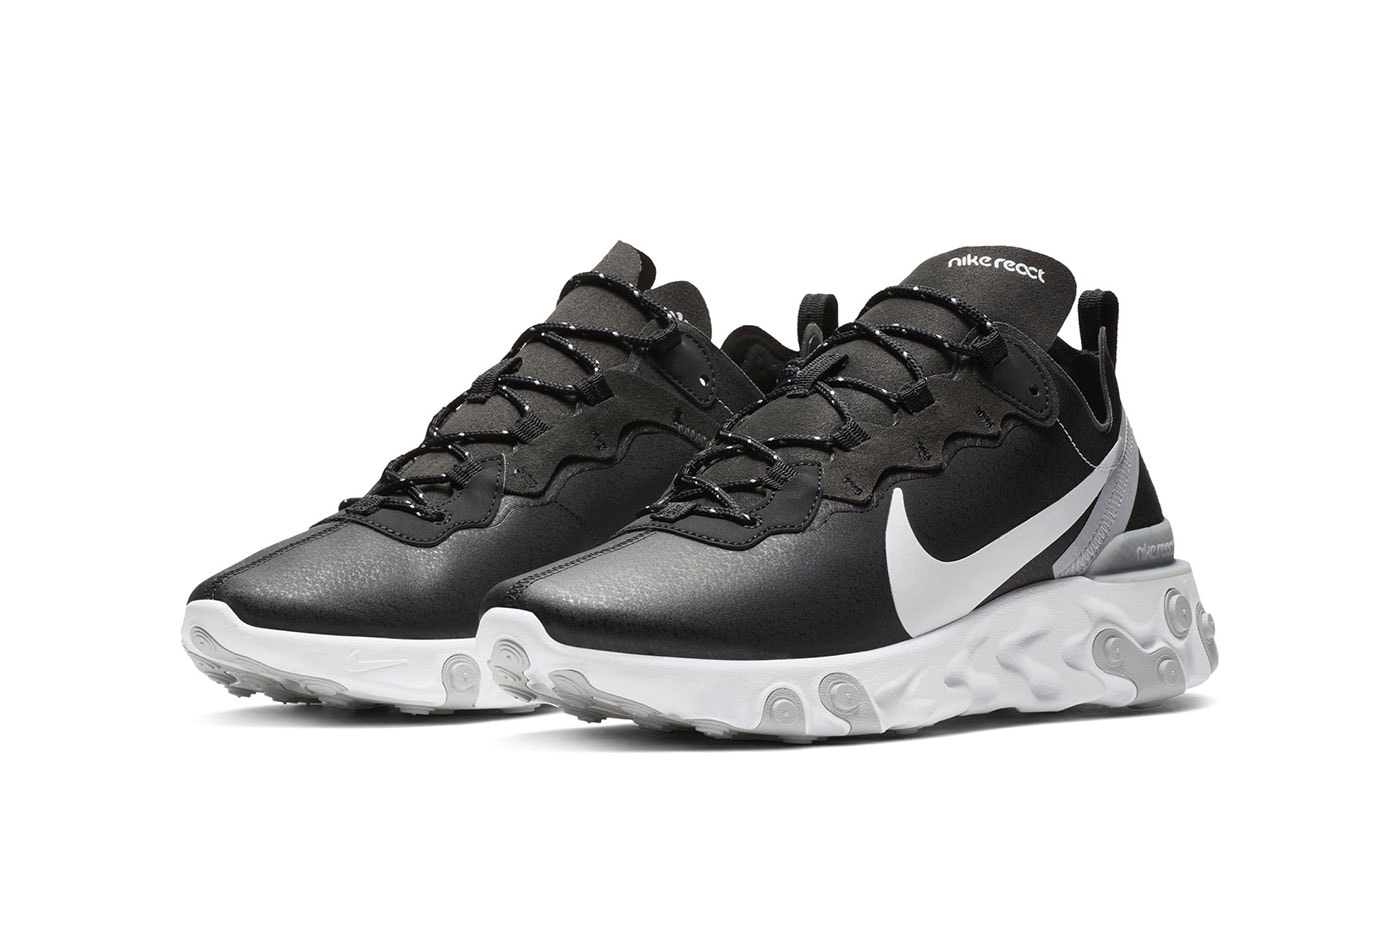 Nike react element 55 black white colorway sneaker grey release date info price